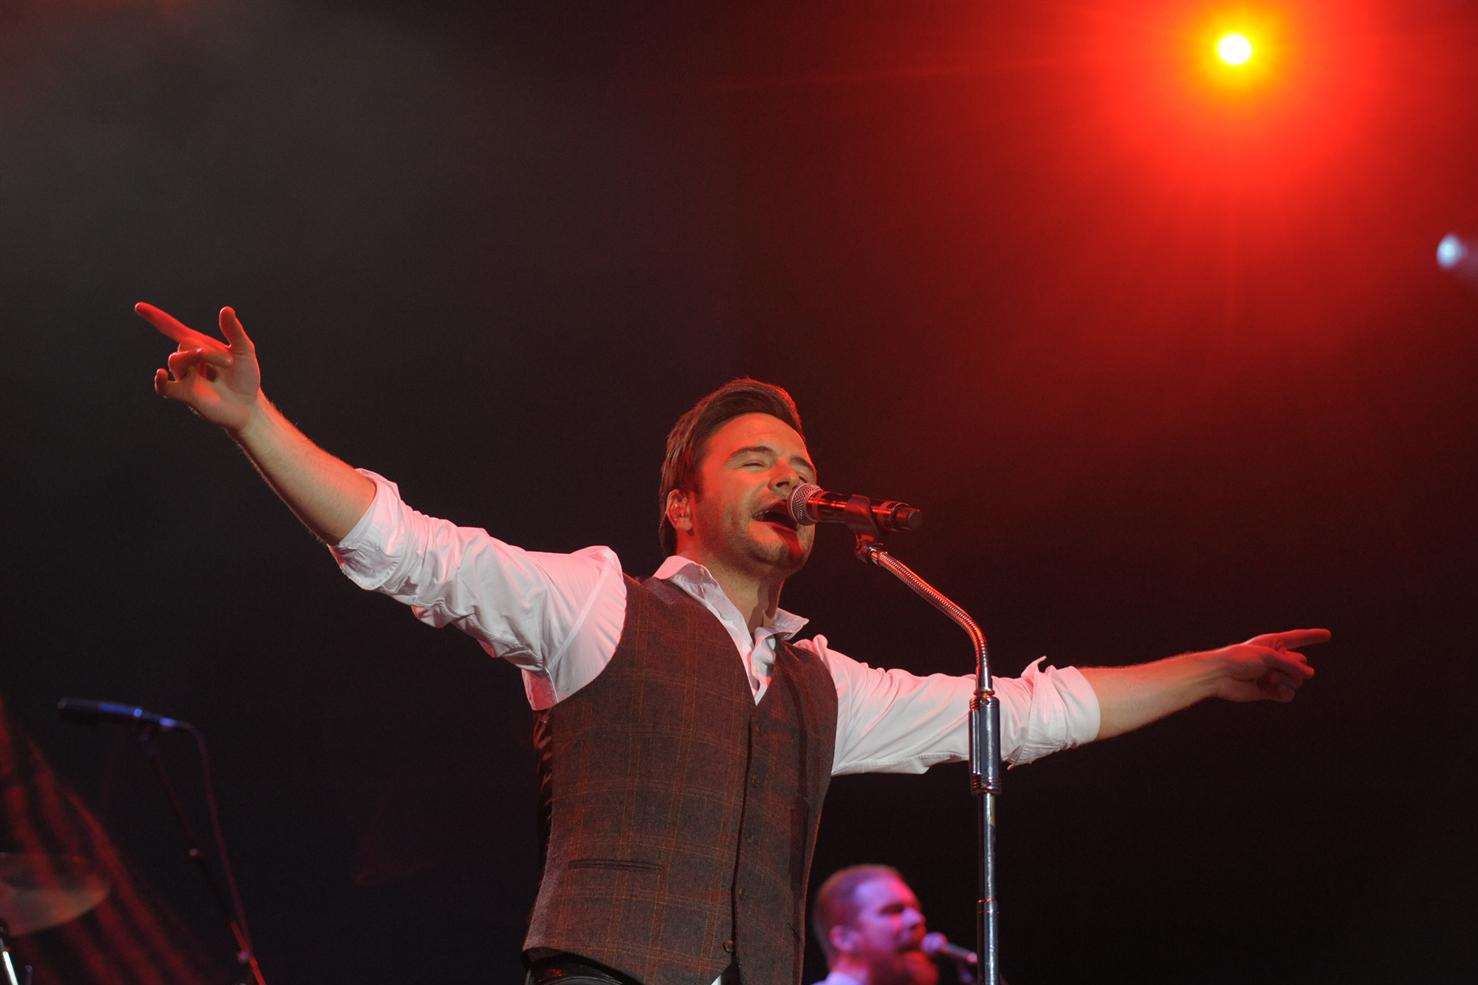 Shane Filan in action at the Castle Concerts